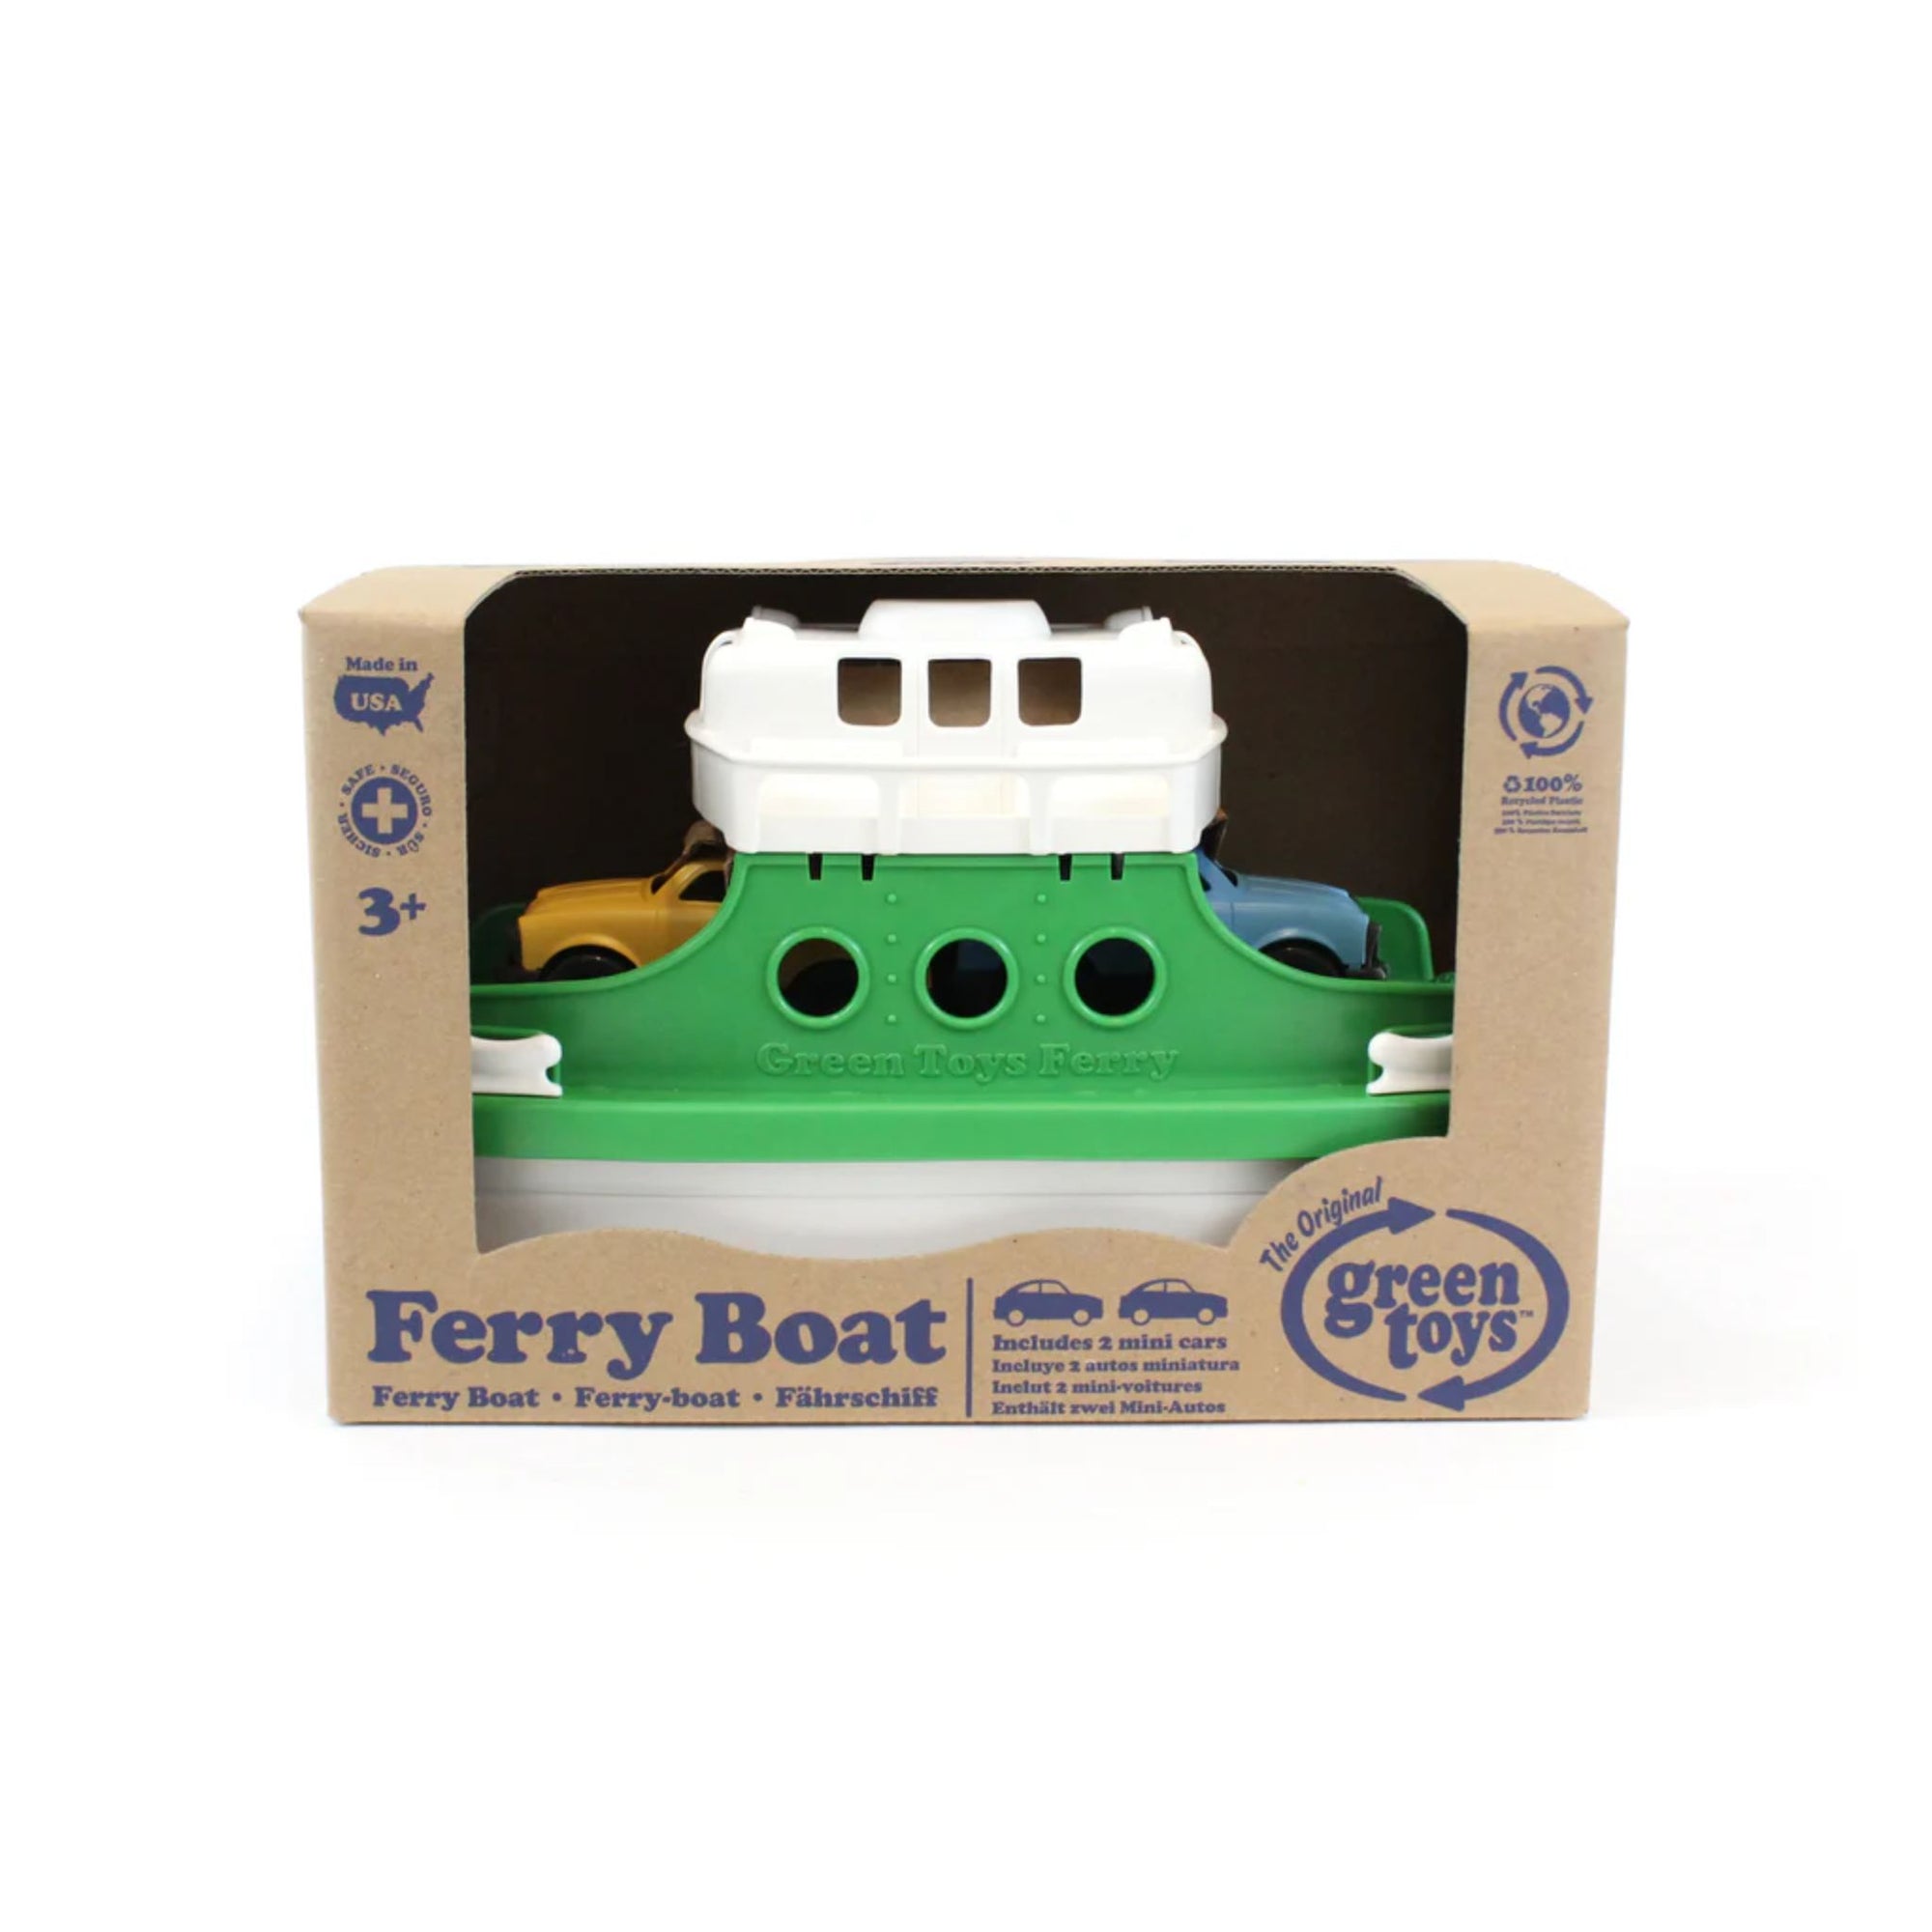 Green Toys Ferry Boat - Green and White